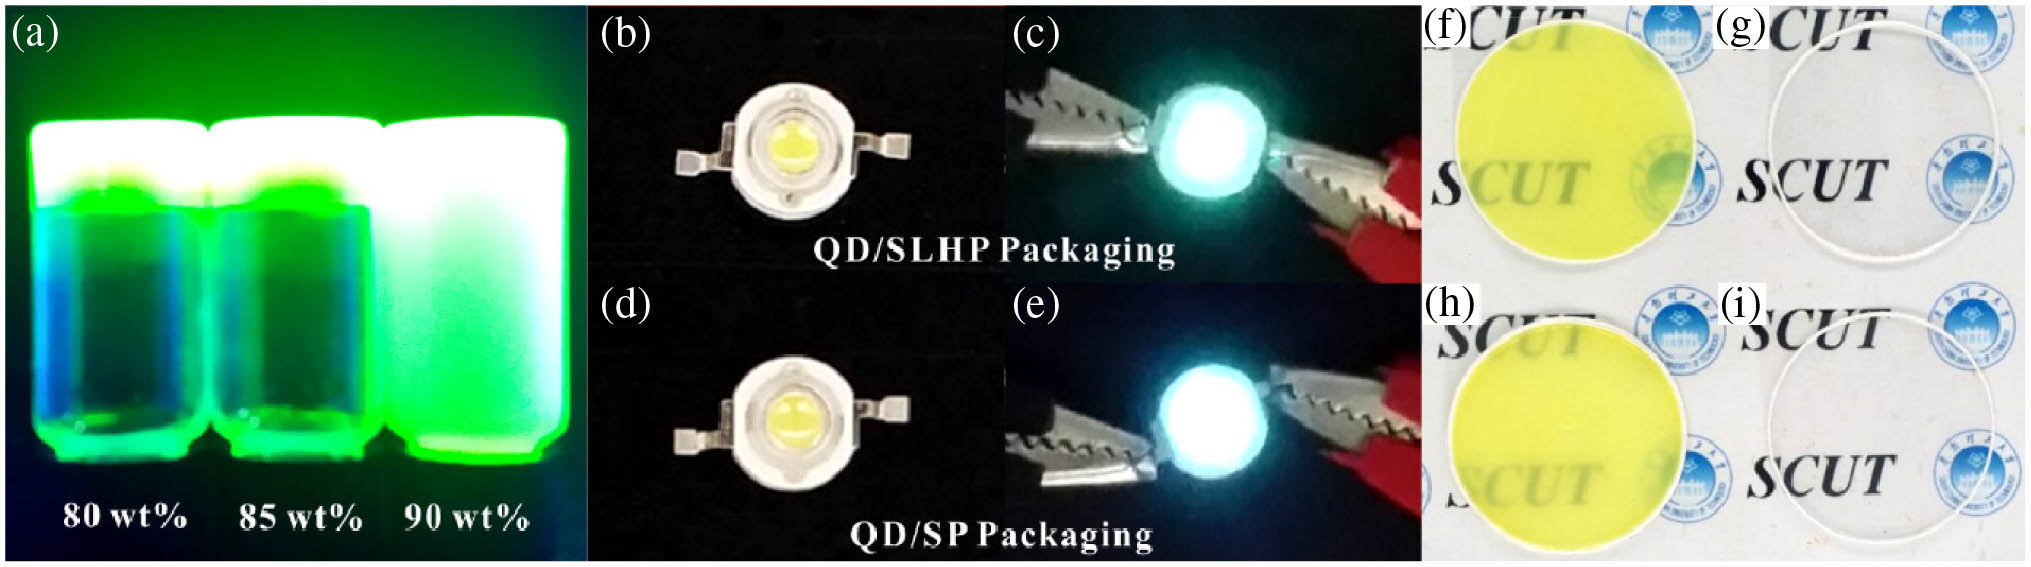 (a) SLHP with methyl-PDMS concentrations of 80 wt. %, 85 wt. %, and 90 wt. % after curing at 125°C for 90 min, respectively. (b)–(c) LED images with QD/SLHP packaging structure (concentrations of QDs and methyl-PDMS are 0.8 and 85 wt. %, respectively) under injection currents of 0 and 2 mA, respectively. (d)–(e) LED images with QD/SP packaging structure (concentrations of QDs and methyl-PDMS are 0.8 and 0, respectively) under injection currents of 0 and 2 mA, respectively. Images of (f) QD/SP film (0.3 wt. % QDs), (g) SP film, (h) QD/SLHP film (0.3 wt. % QD and 85 wt. % methyl-PDMS), and (i) SLHP film (85 wt. % methyl-PDMS).